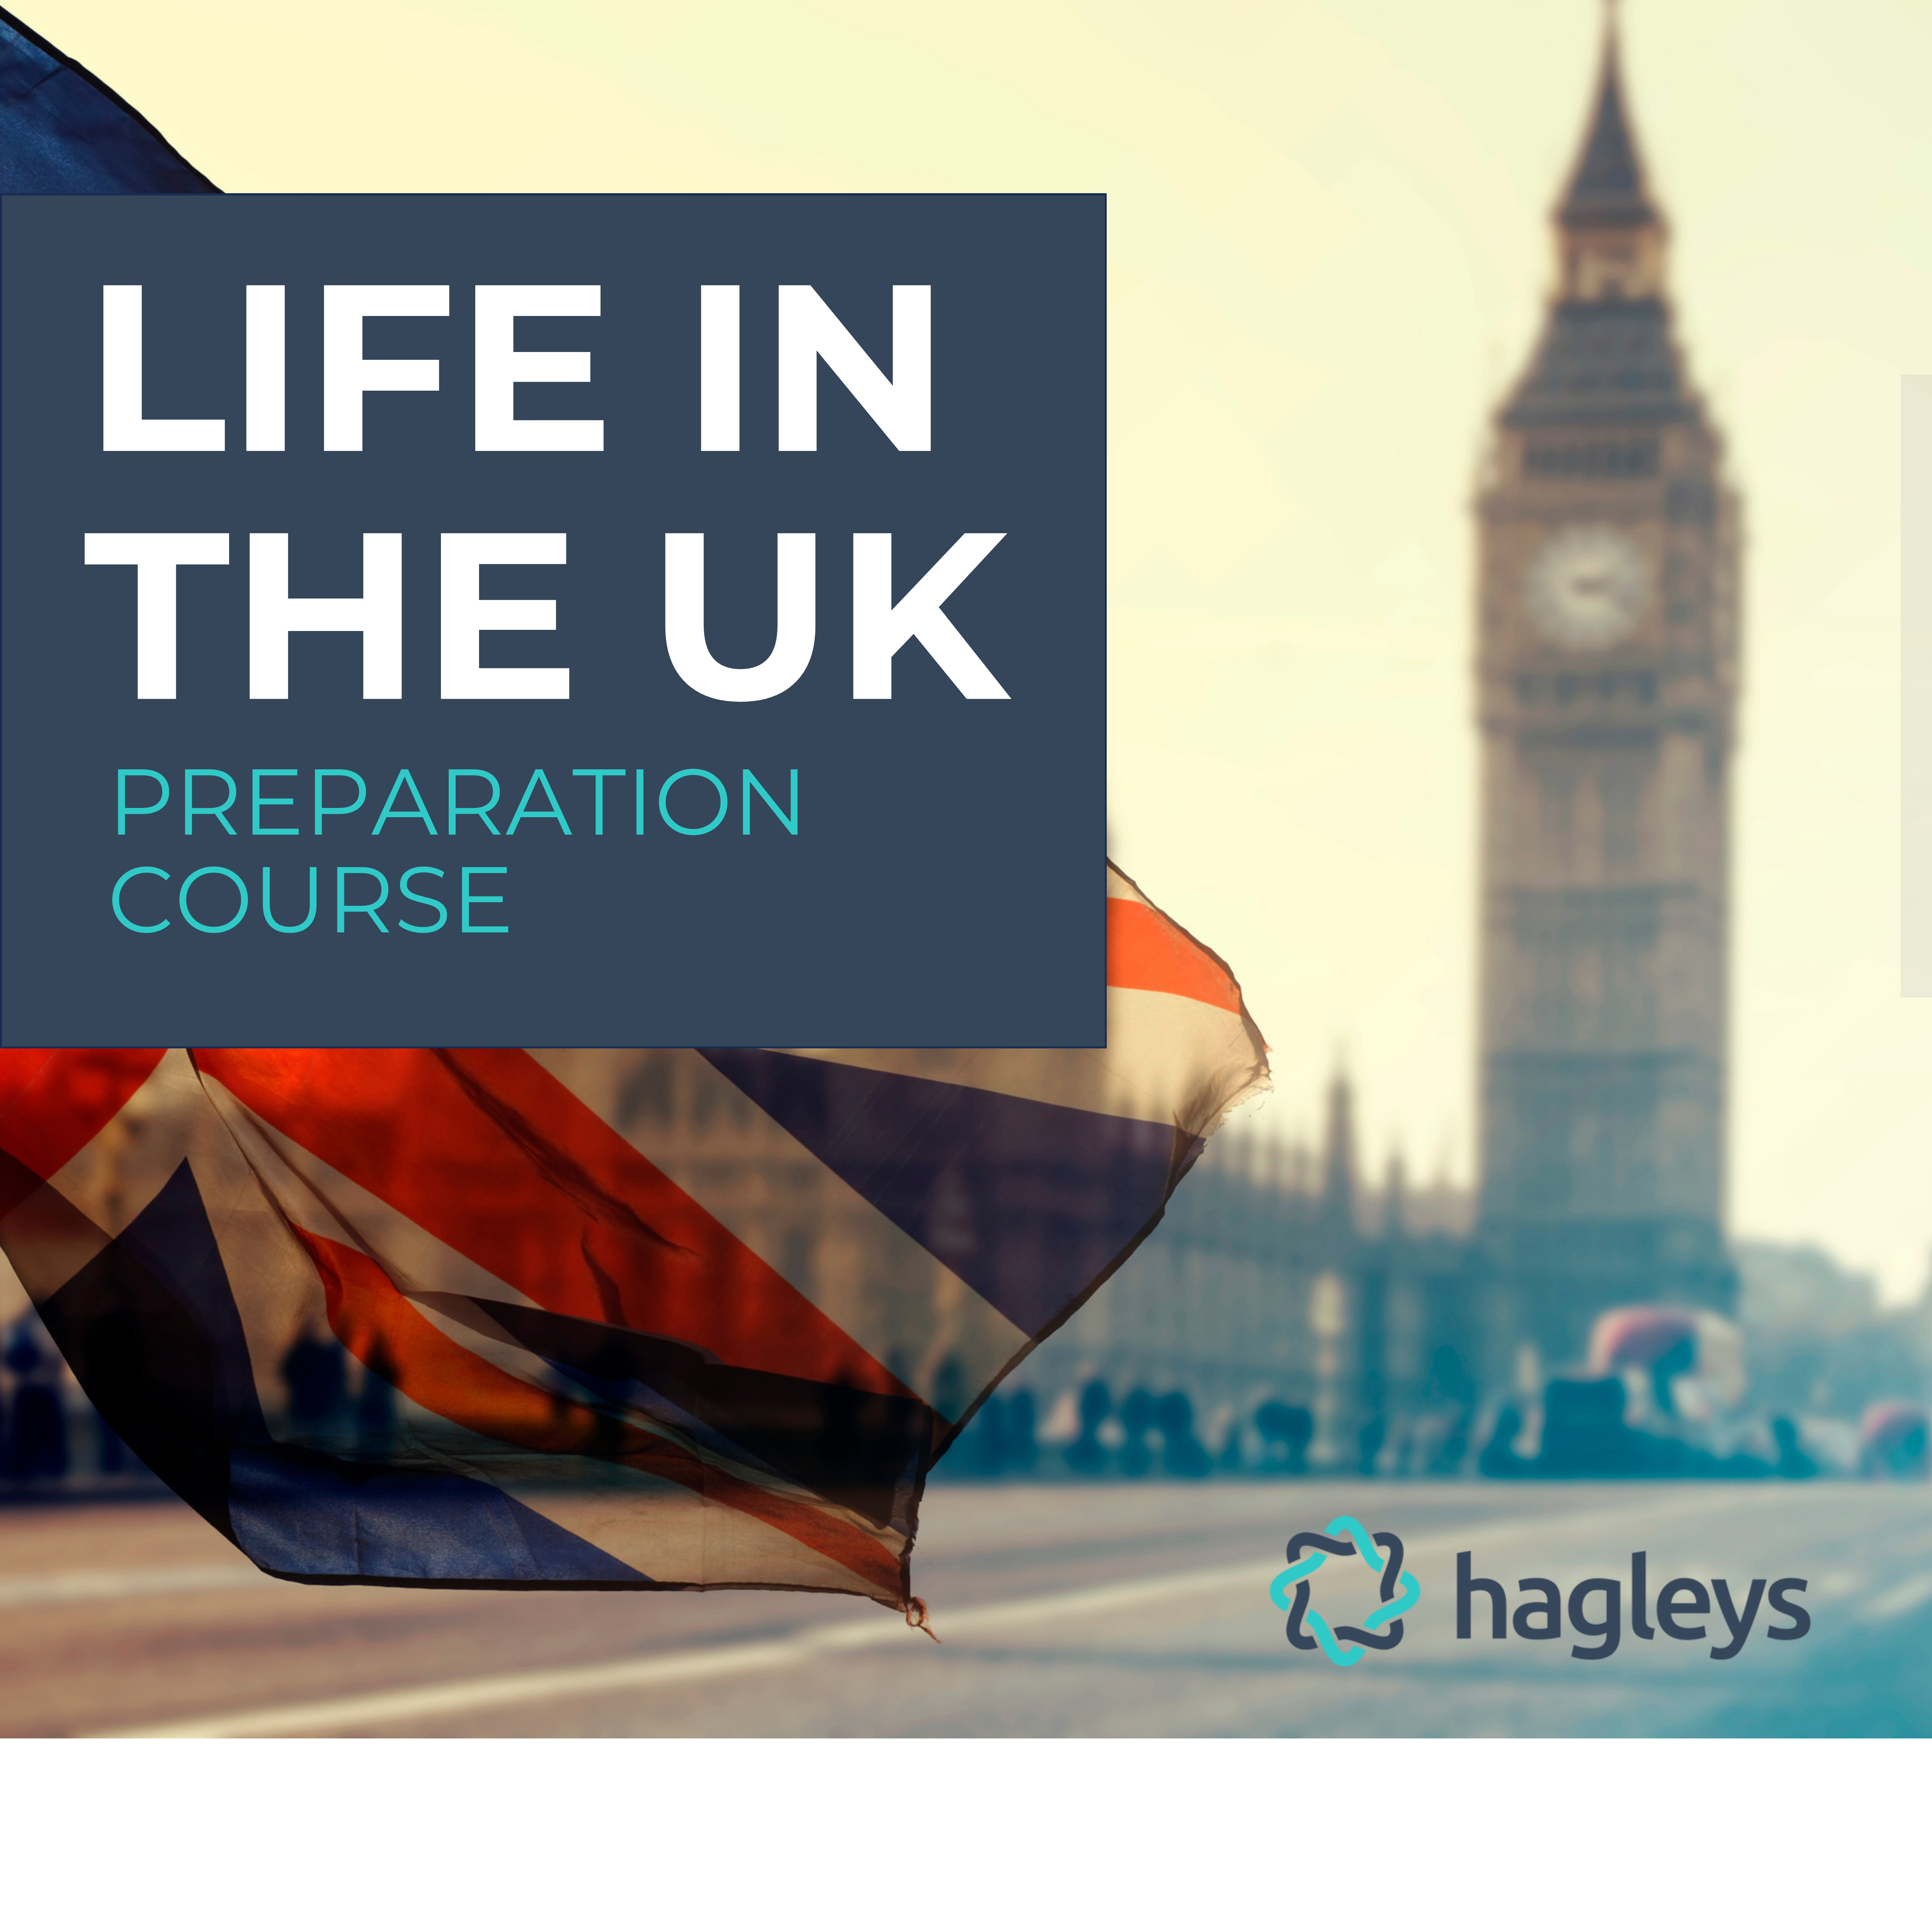 Life in the UK Preparation Course